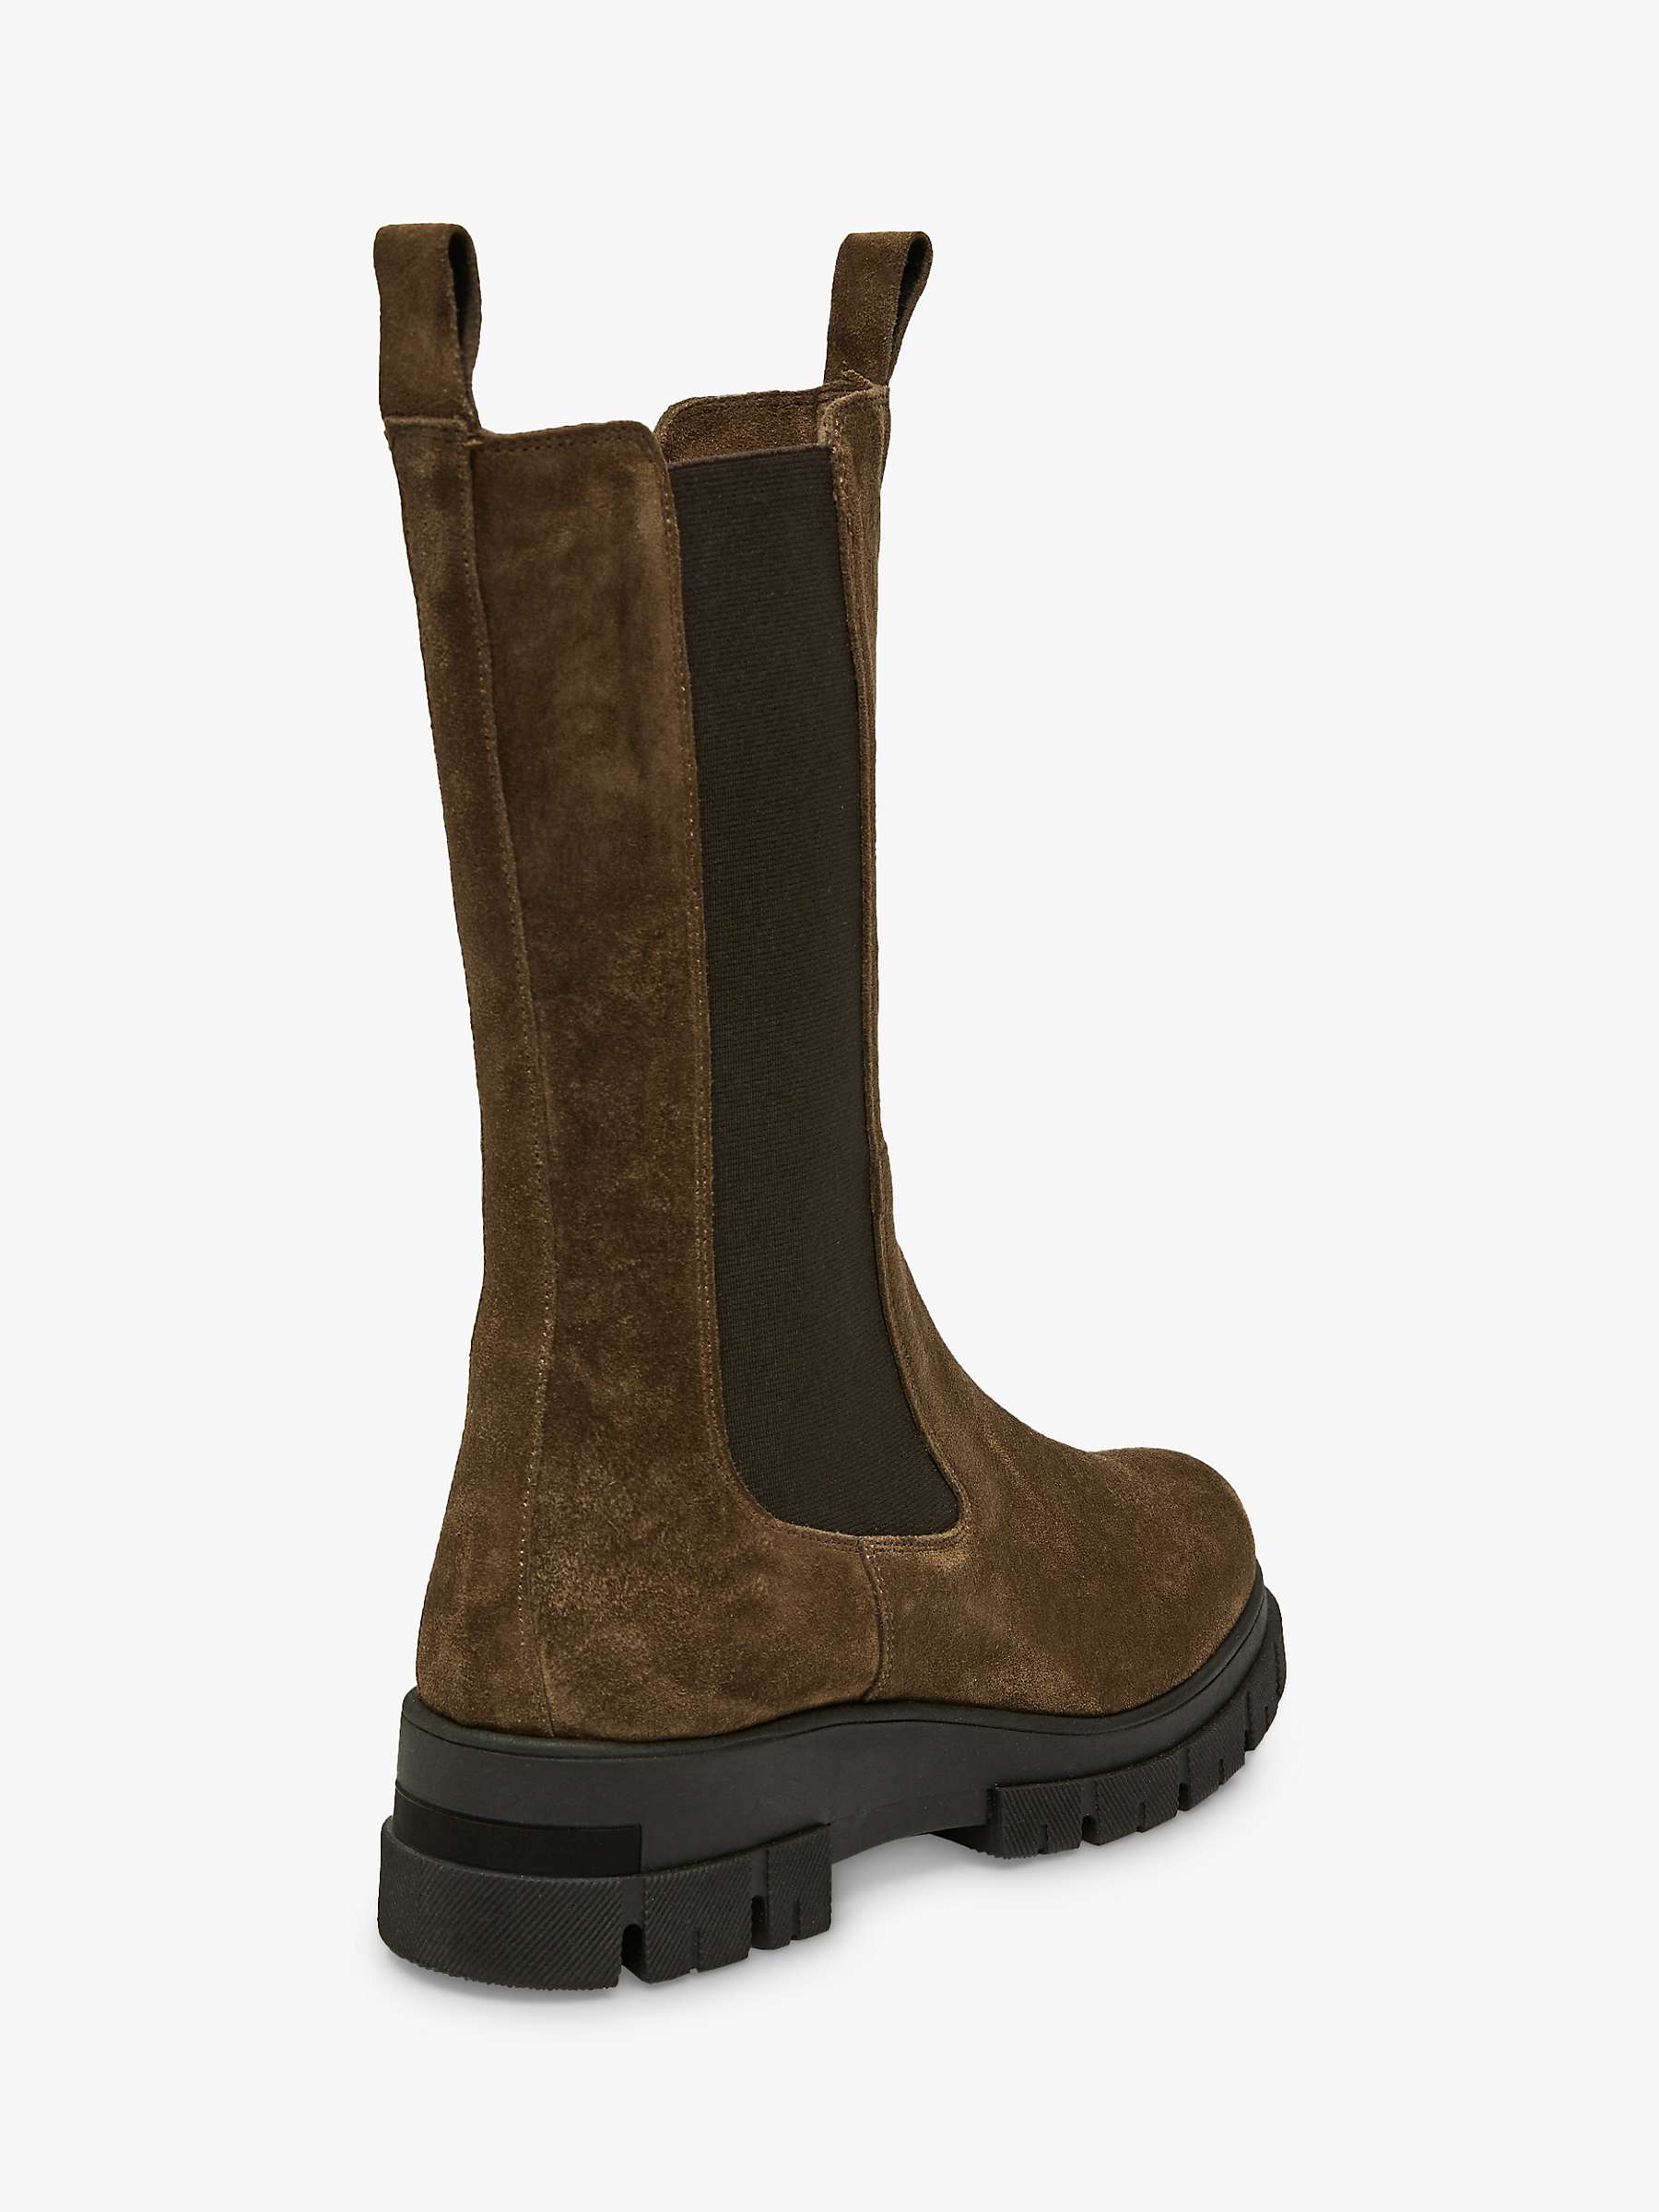 Buy Celtic & Co. Suede Chunky Tall Chelsea Boots, Tanners Brown Online at johnlewis.com